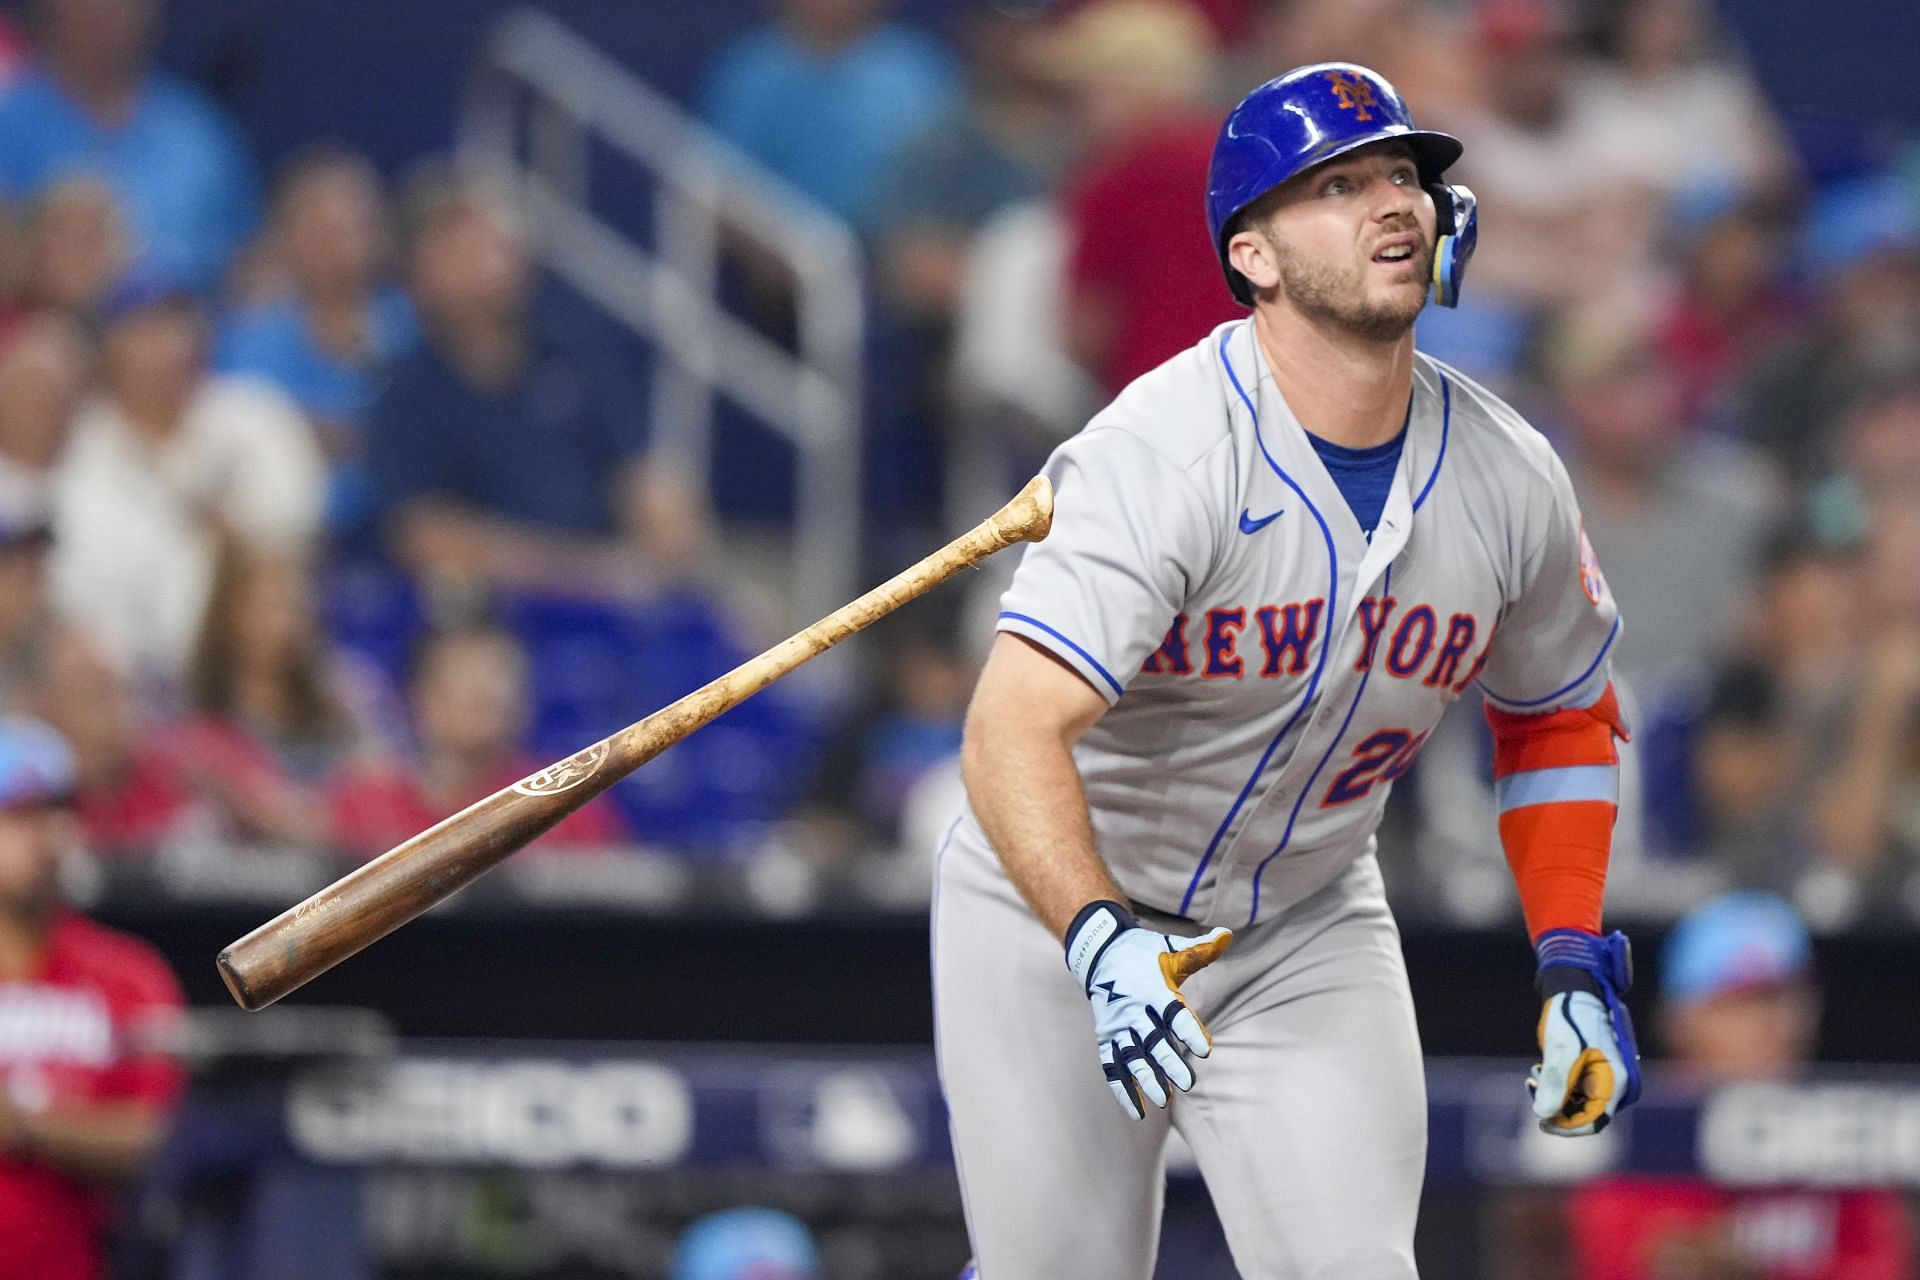 Pete Alonso of the New York Mets hits a home run.